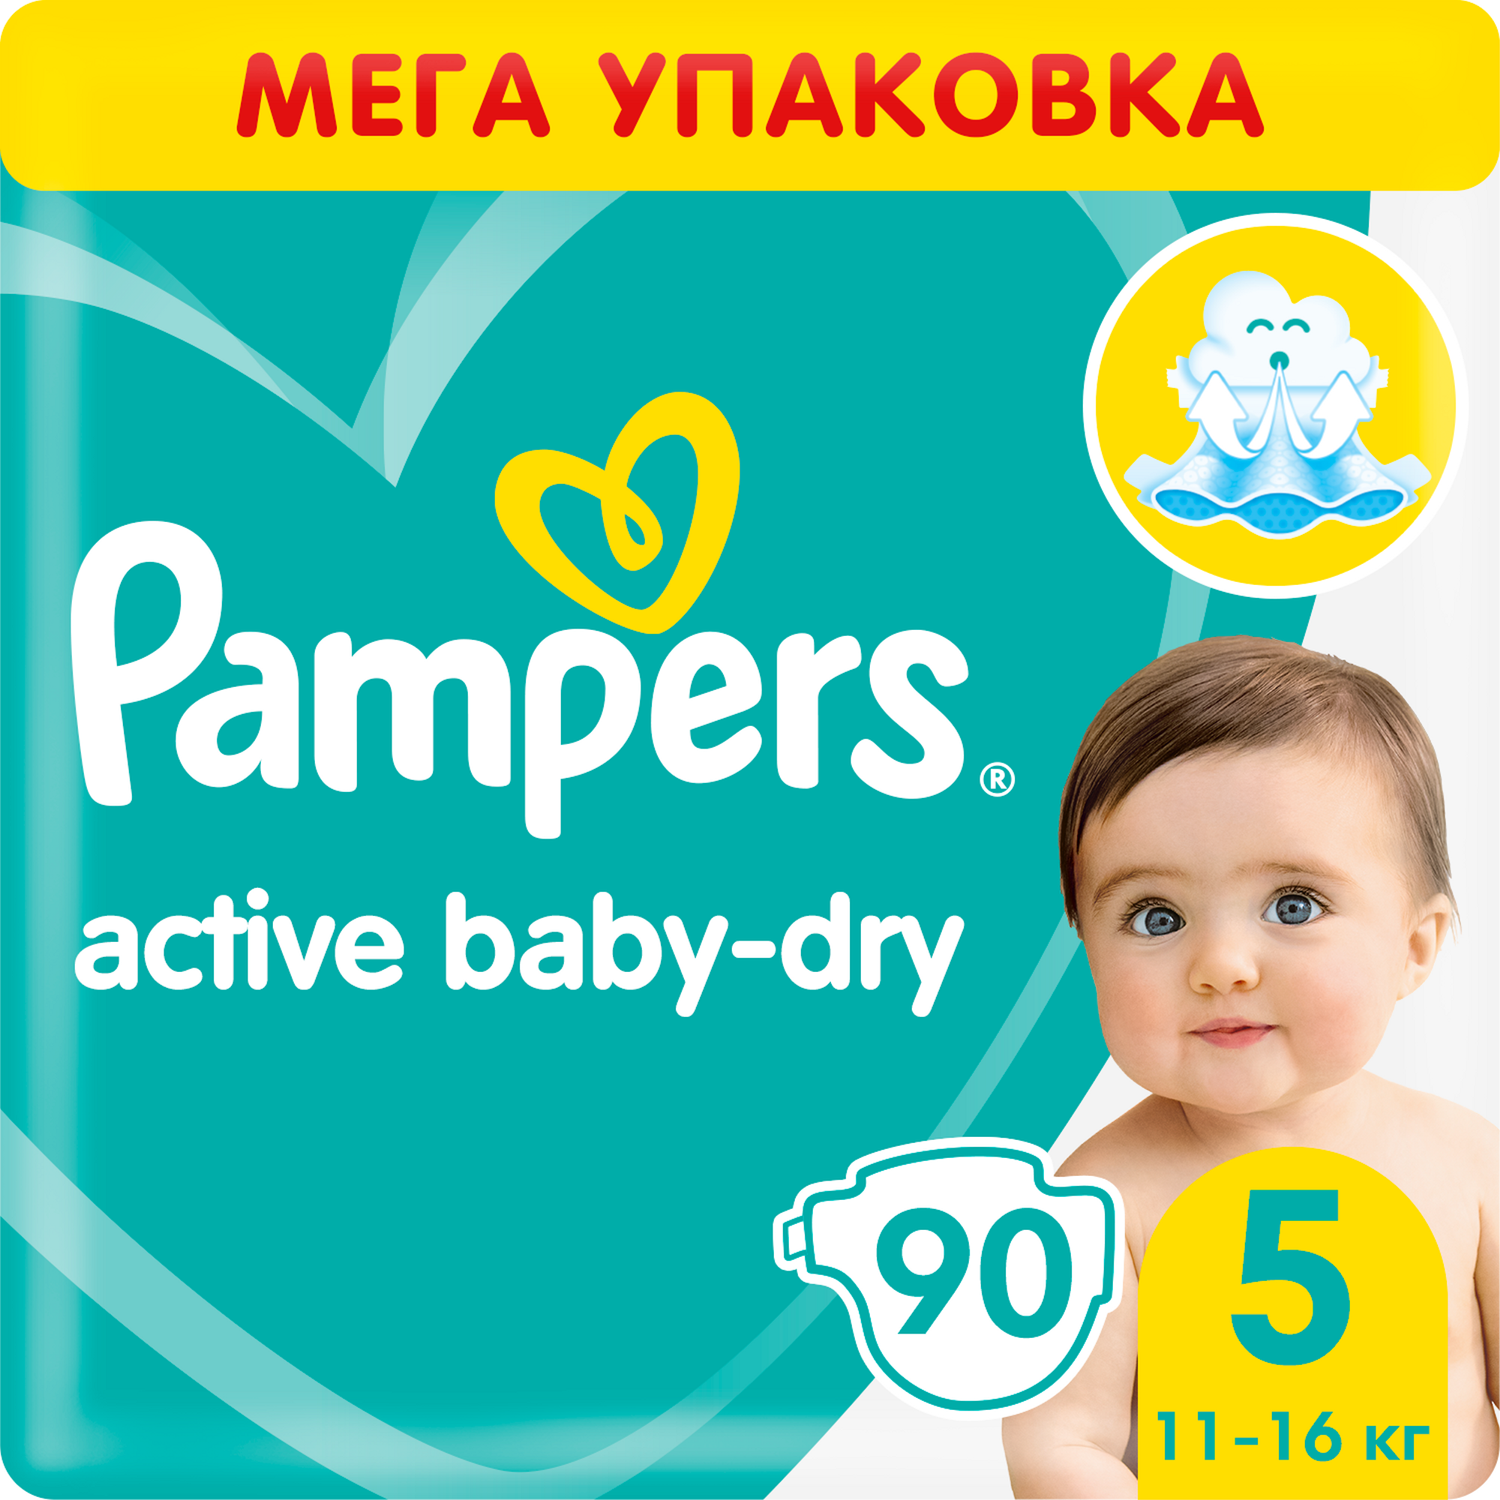 pampers activ babe